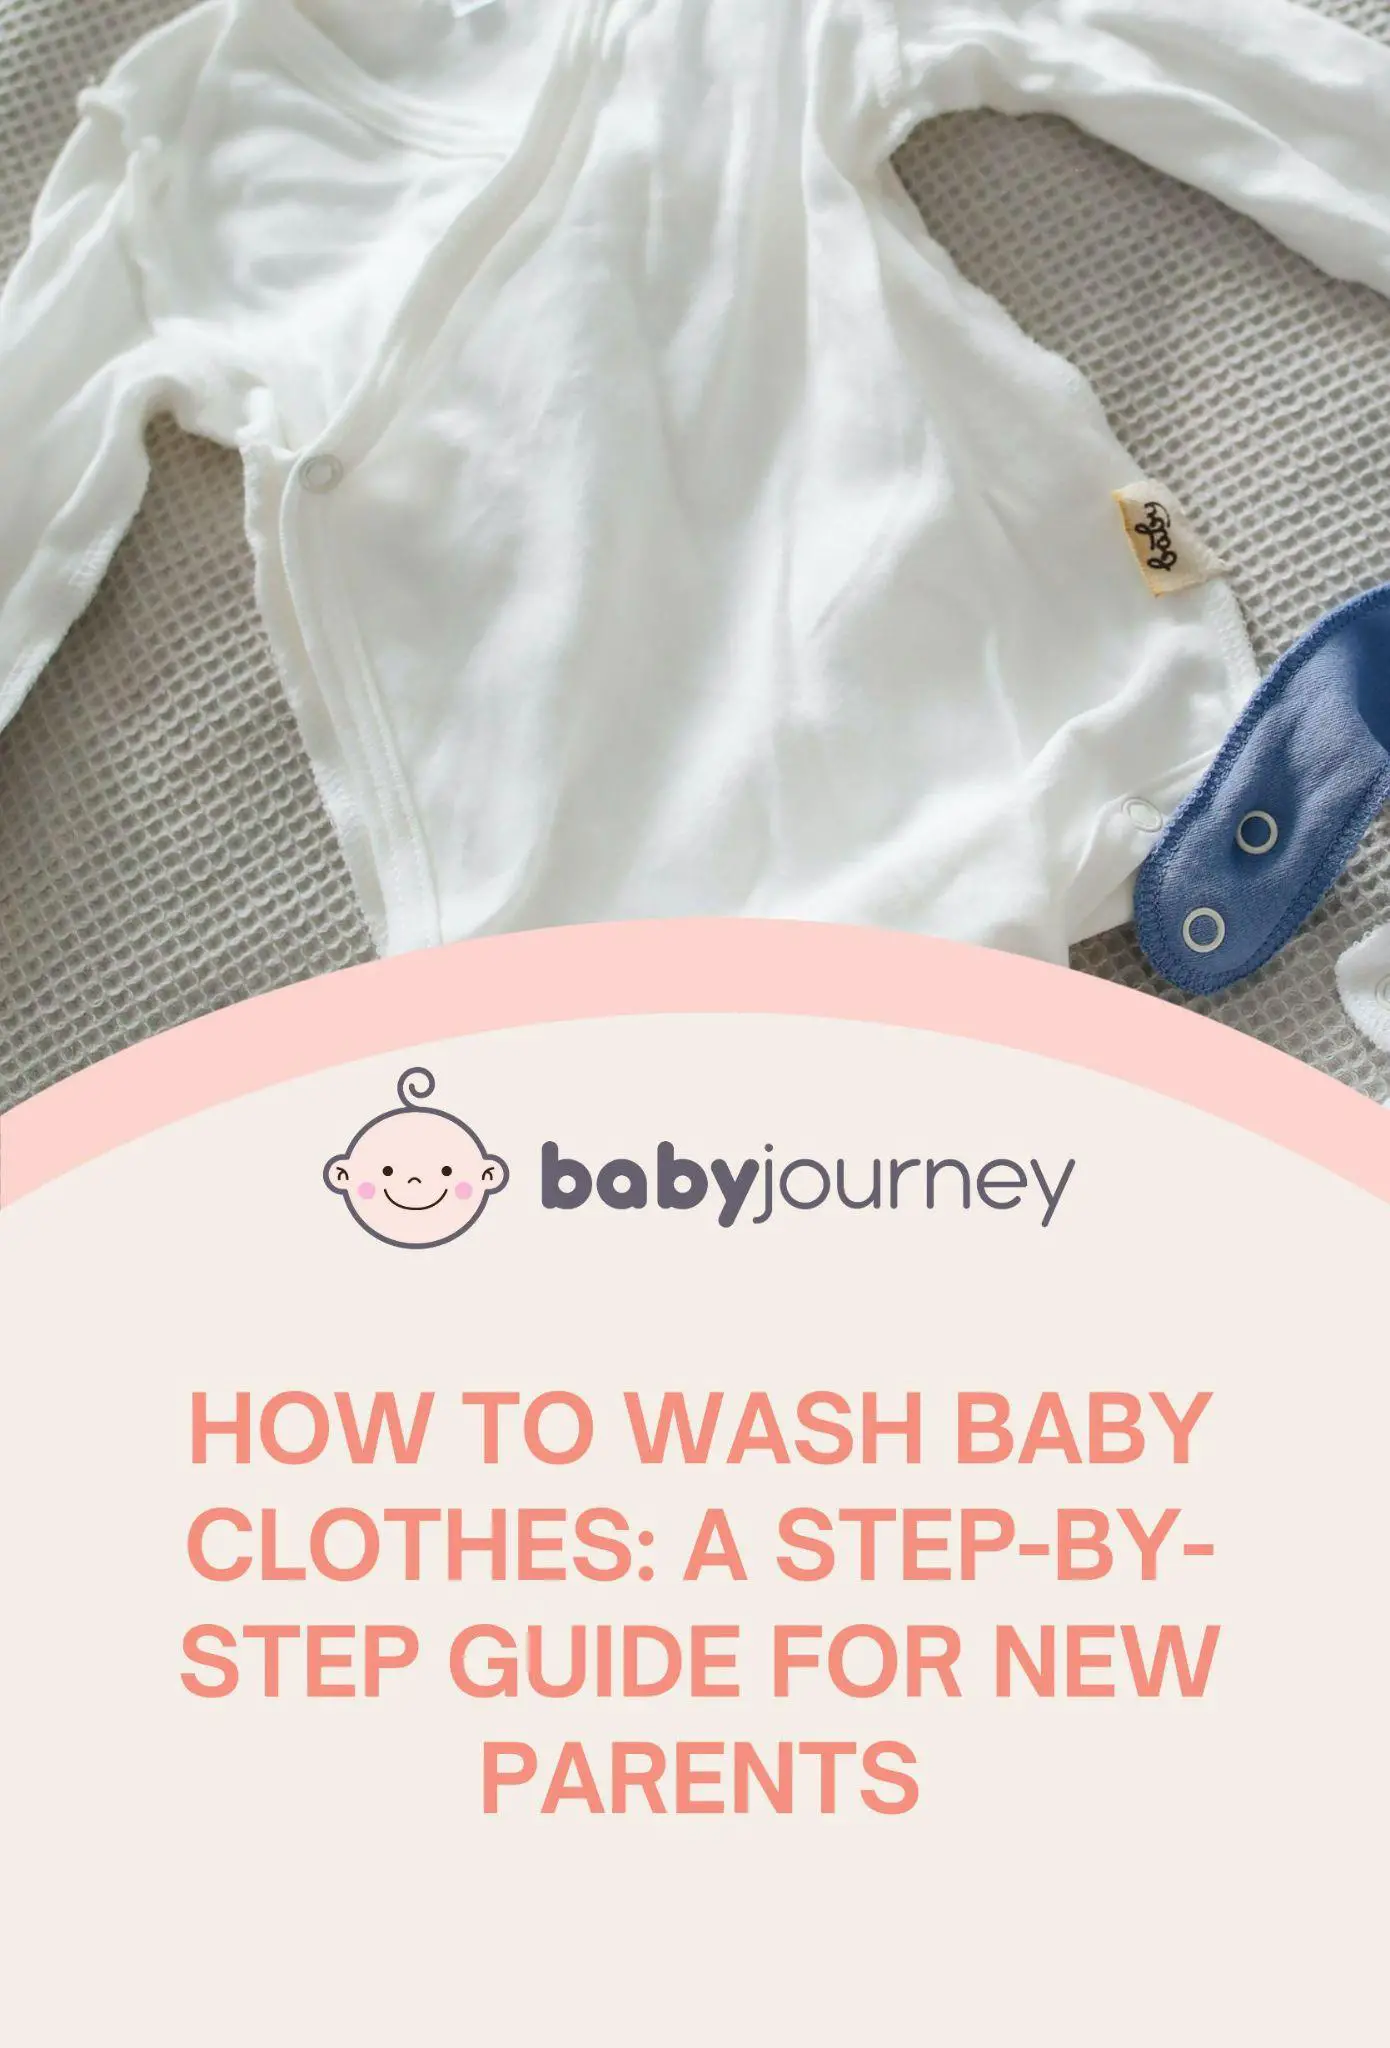 How to Wash Baby Clothes Pinterest - Baby Journey